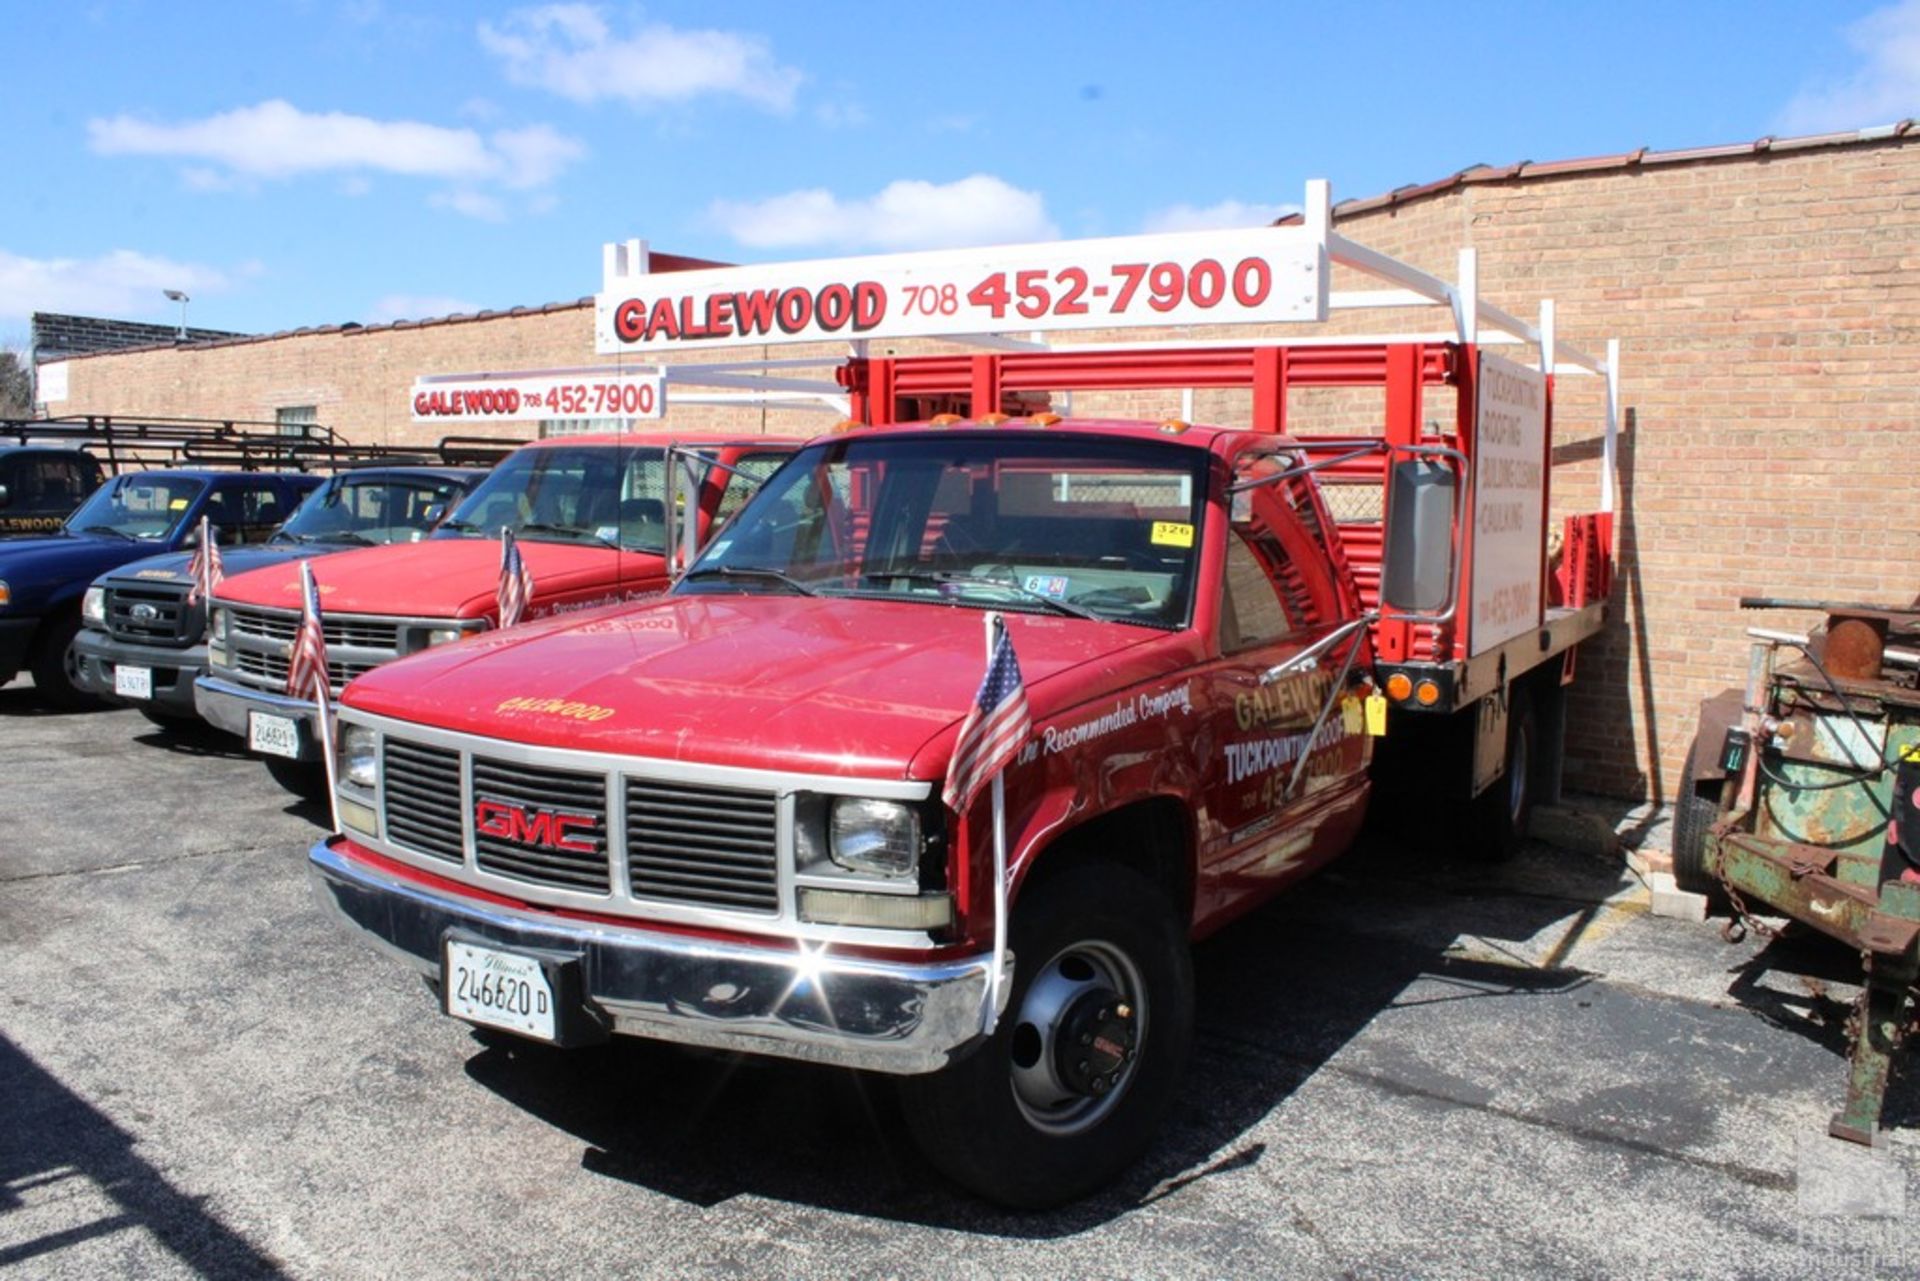 1991 GMC MODEL 3500 STAKE TRUCK, VIN: 1GDJC34K6ME507692, 12' STEEL DECK WITH REMOVABLE GUARDS,